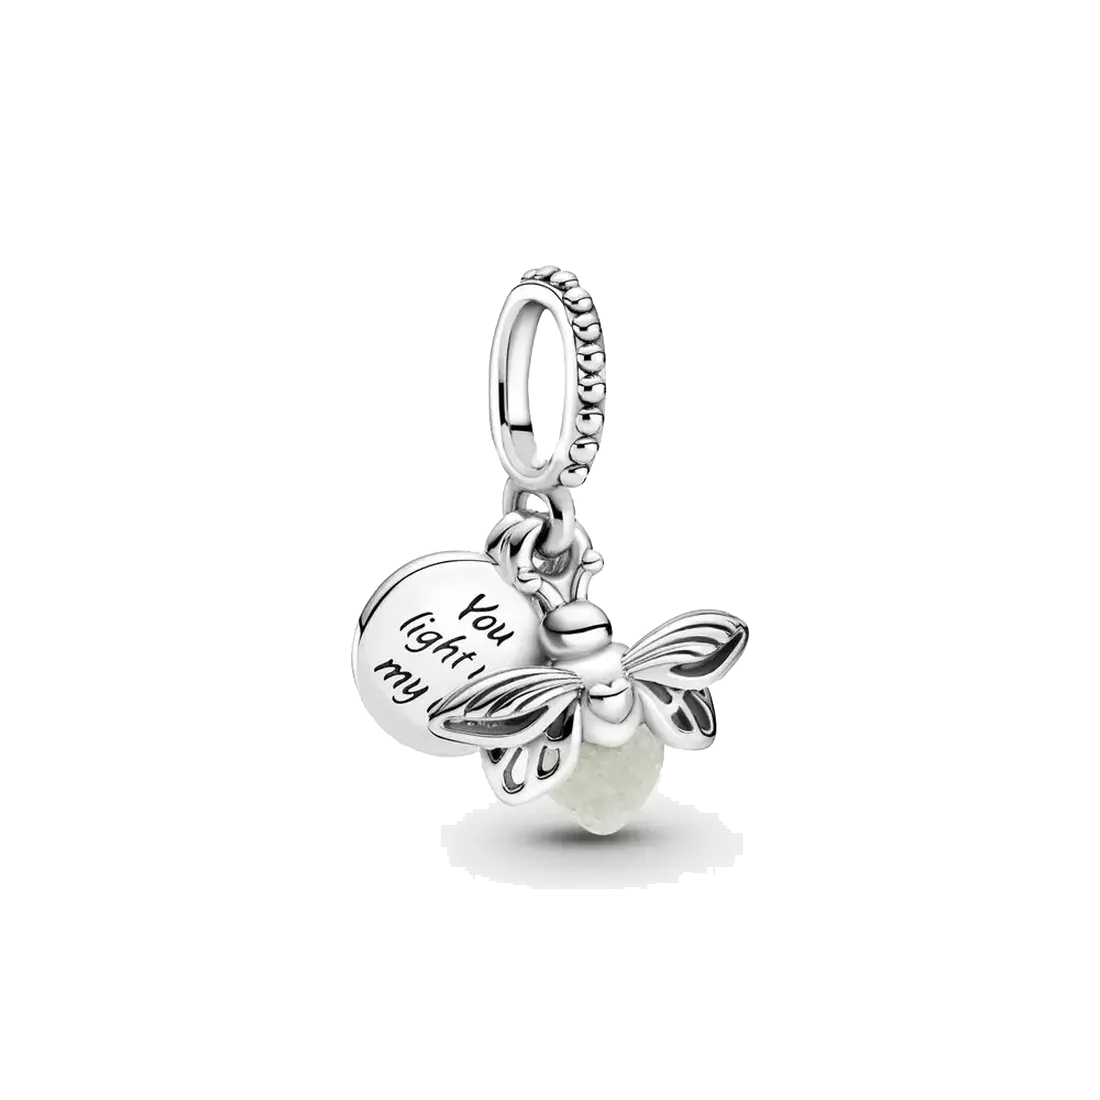 Image of Fine jewelry Authentic 925 Sterling Silver Bead Fit Pandora Charm Bracelets Glow-in-the-dark Firefly Dangle Charms Safety Chain Pendant DIY beads